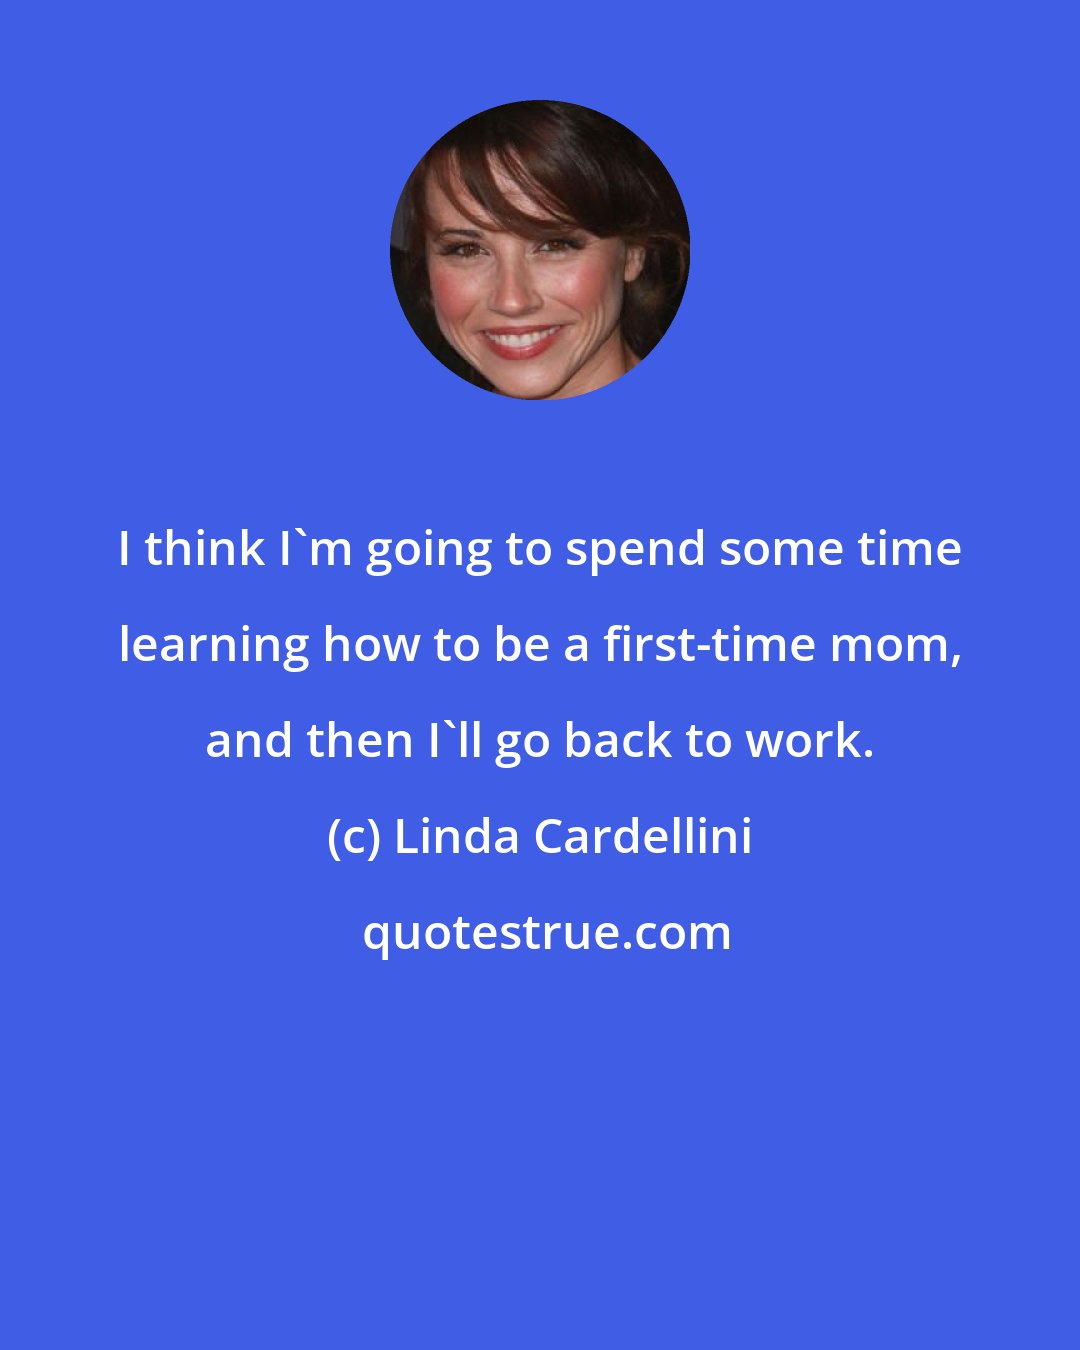 Linda Cardellini: I think I'm going to spend some time learning how to be a first-time mom, and then I'll go back to work.